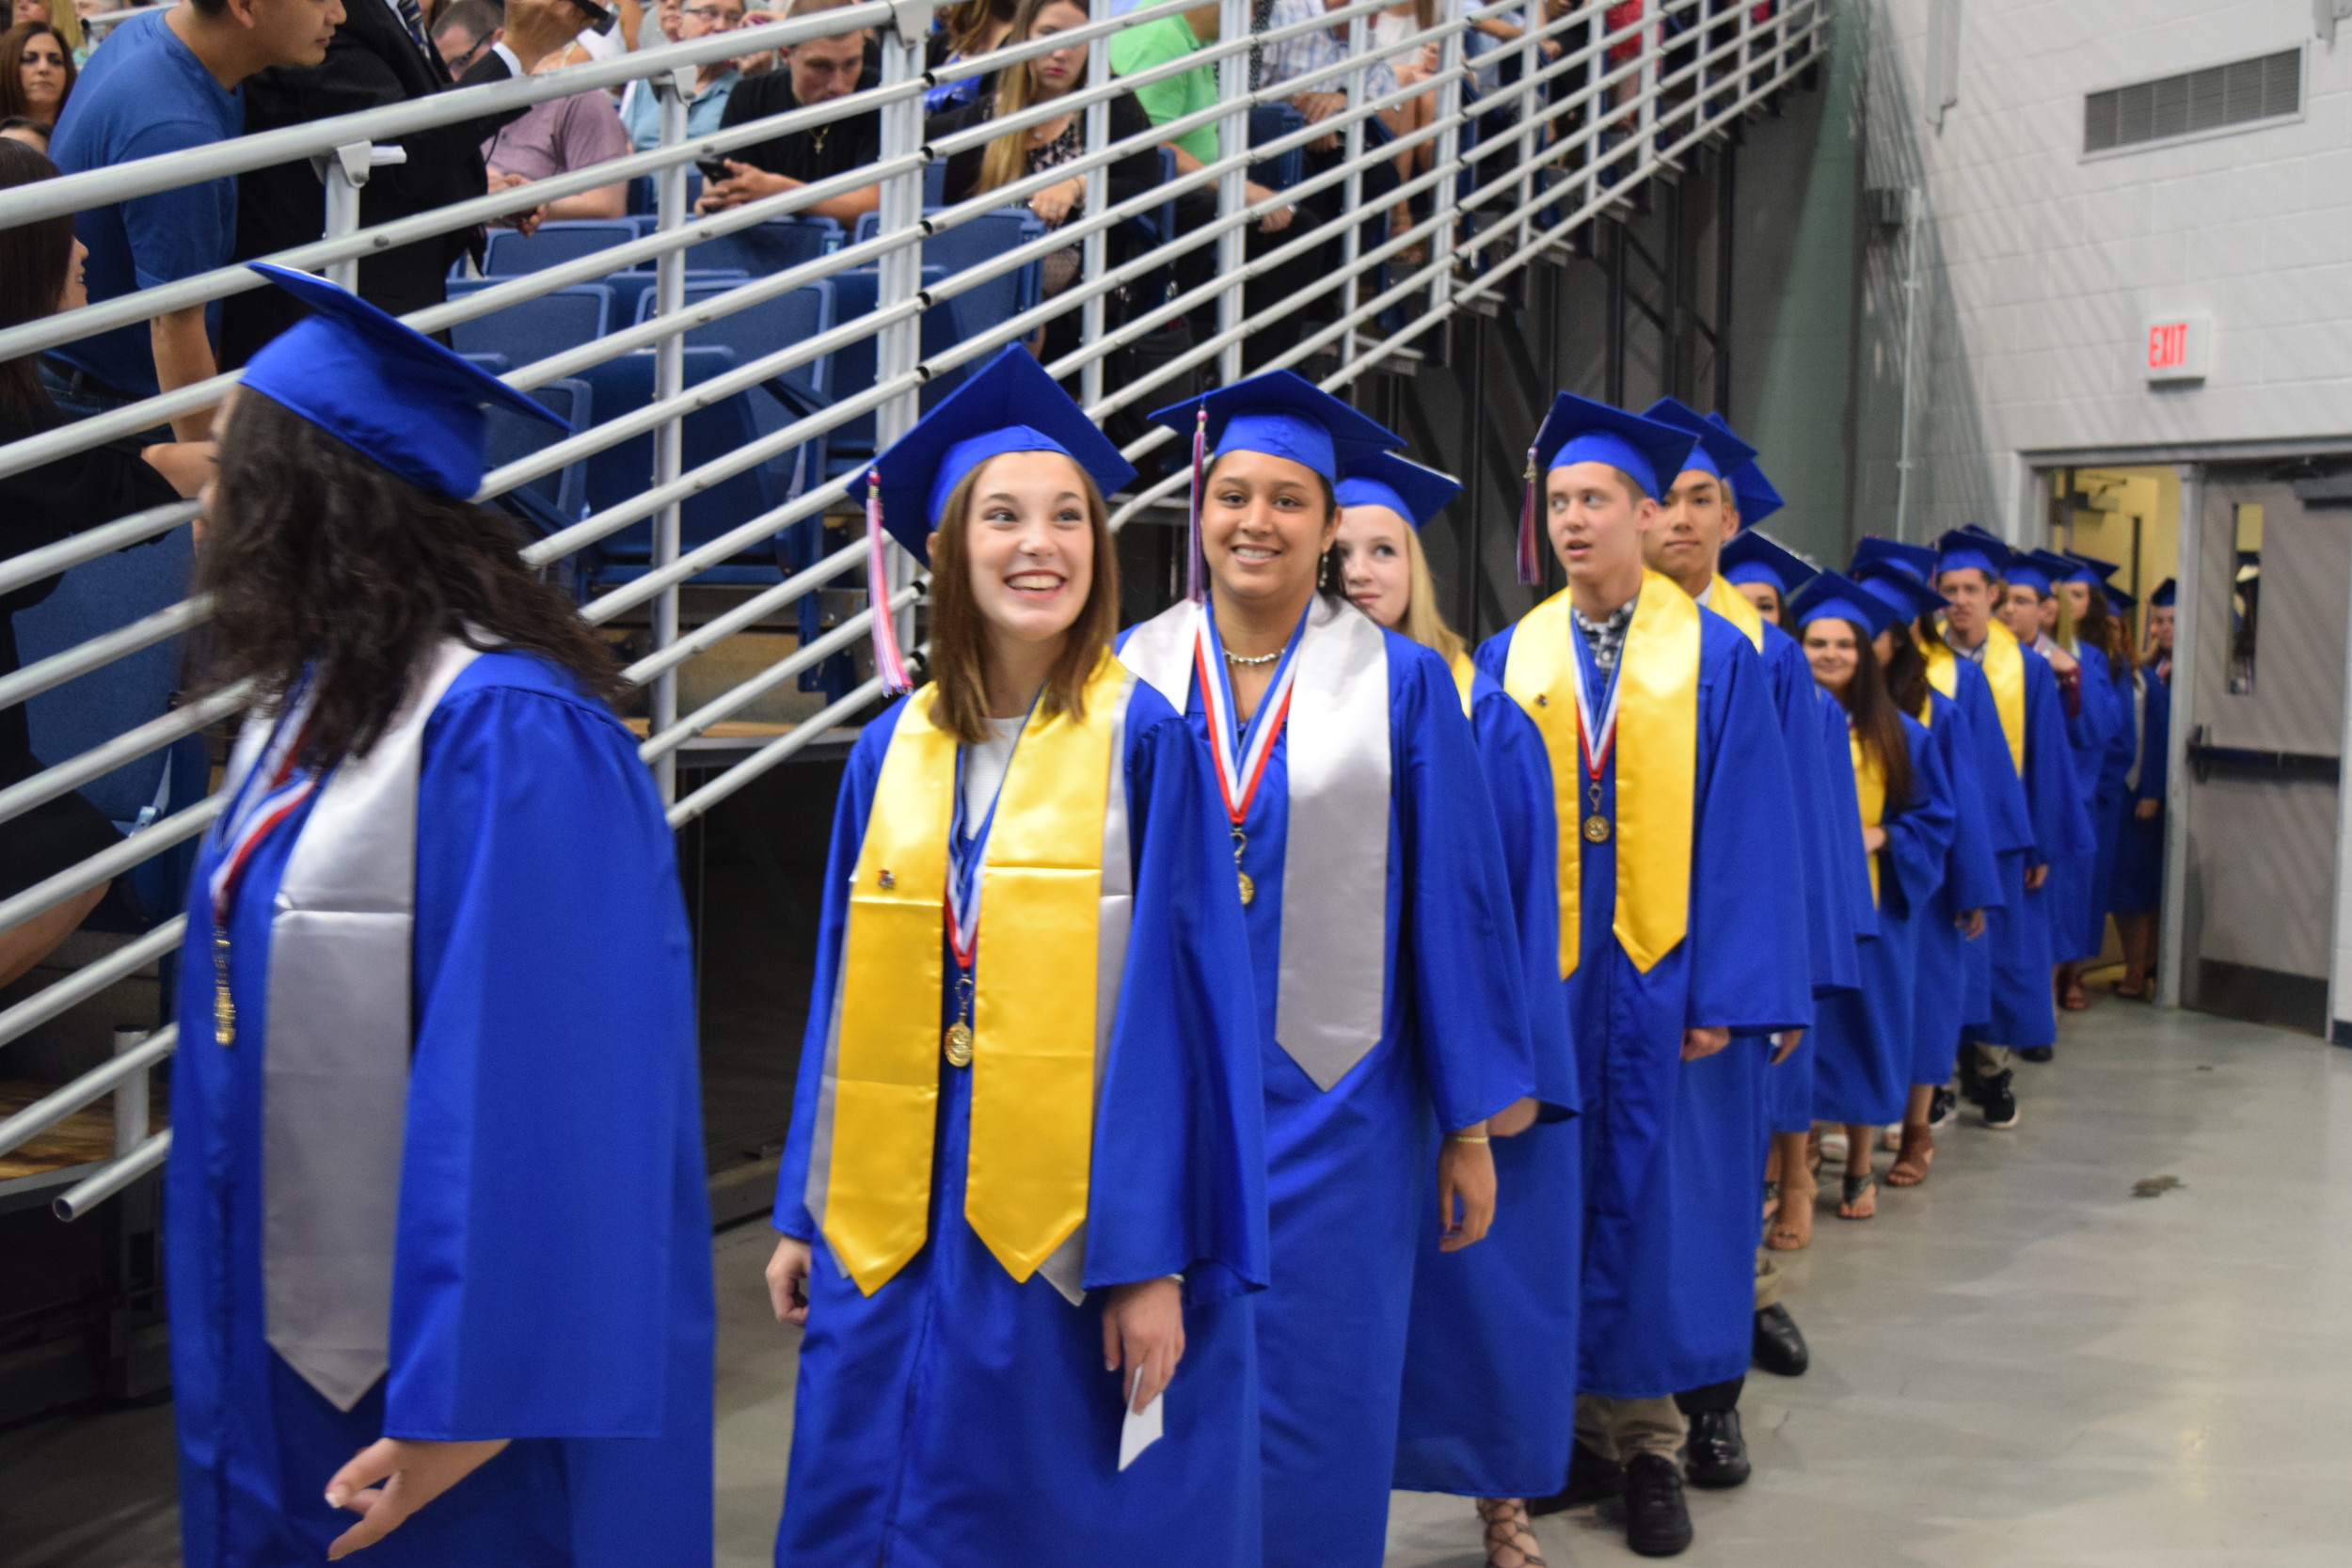 MacArthur graduates entered the Mack Arena at Hofstra University on June 18 for the ceremony that would close out their high school careers.